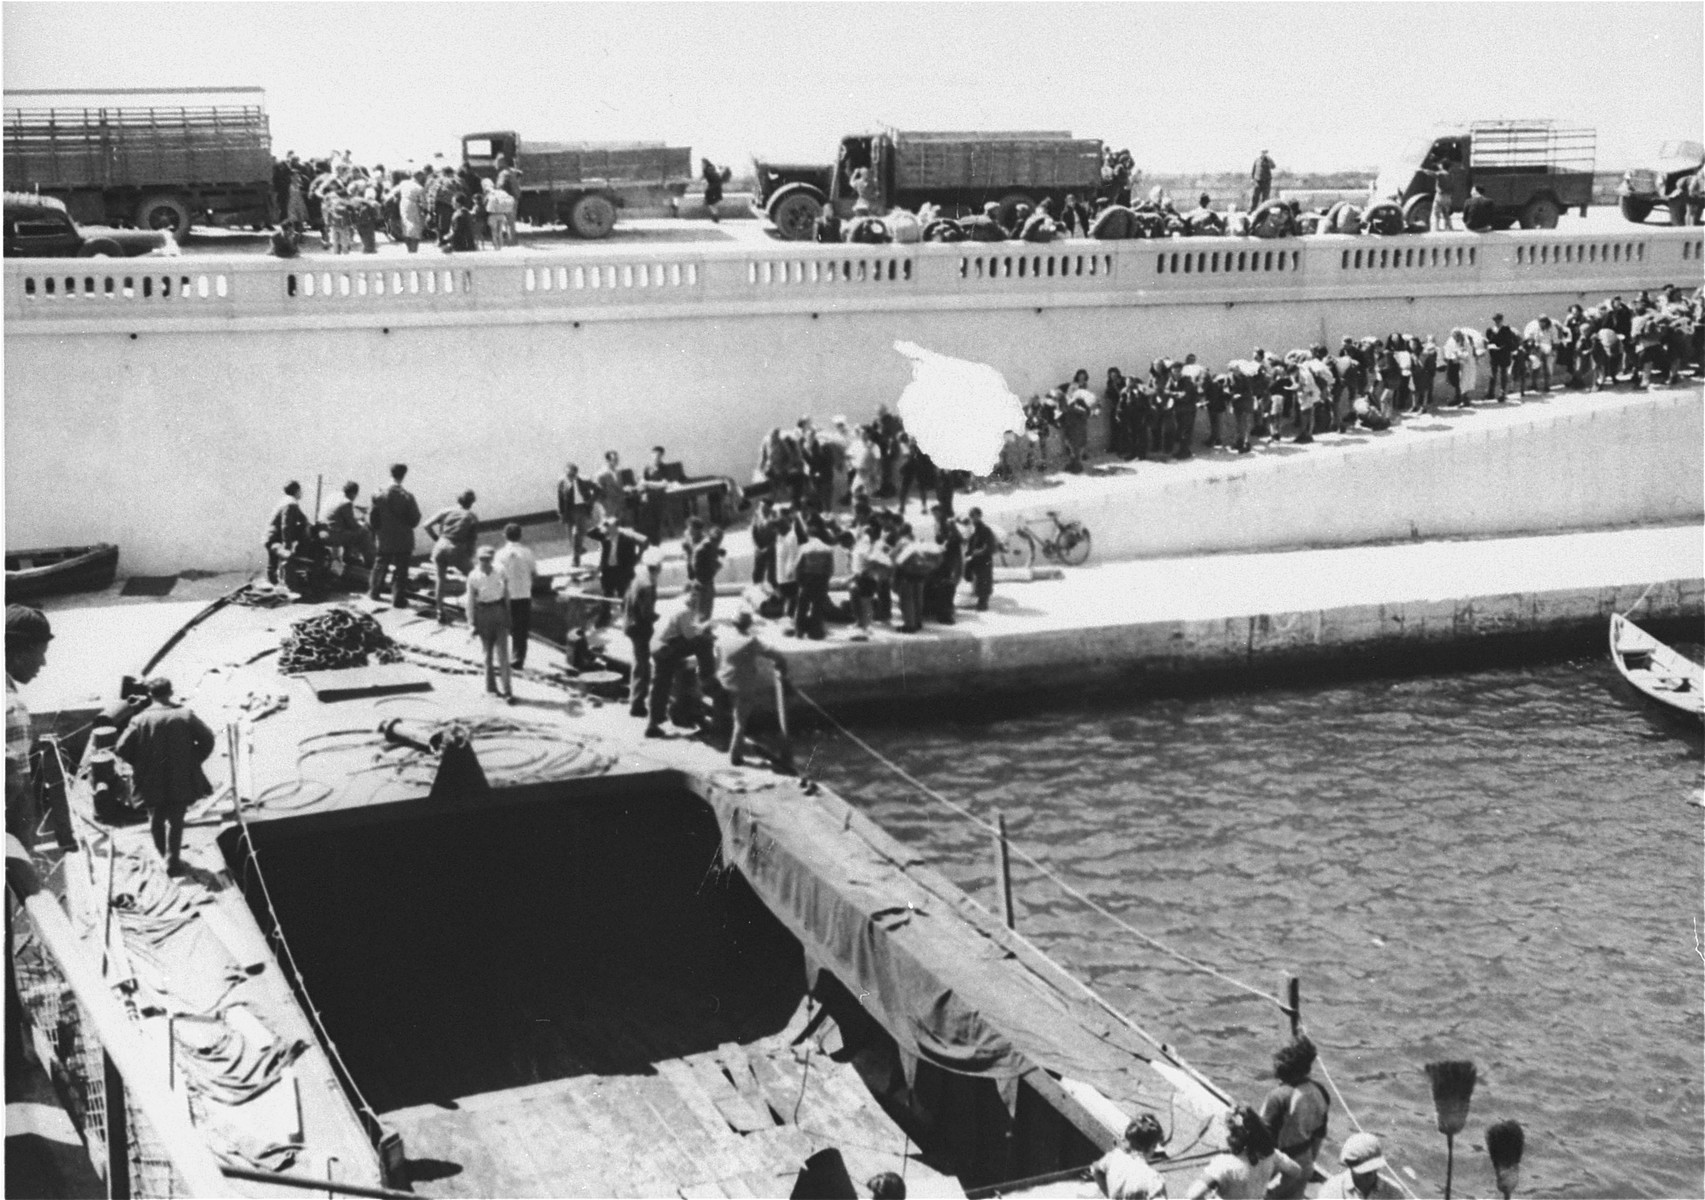 Exodus 1947 refugees make their way along a quay in Sete's harbor toward the President Warfield.